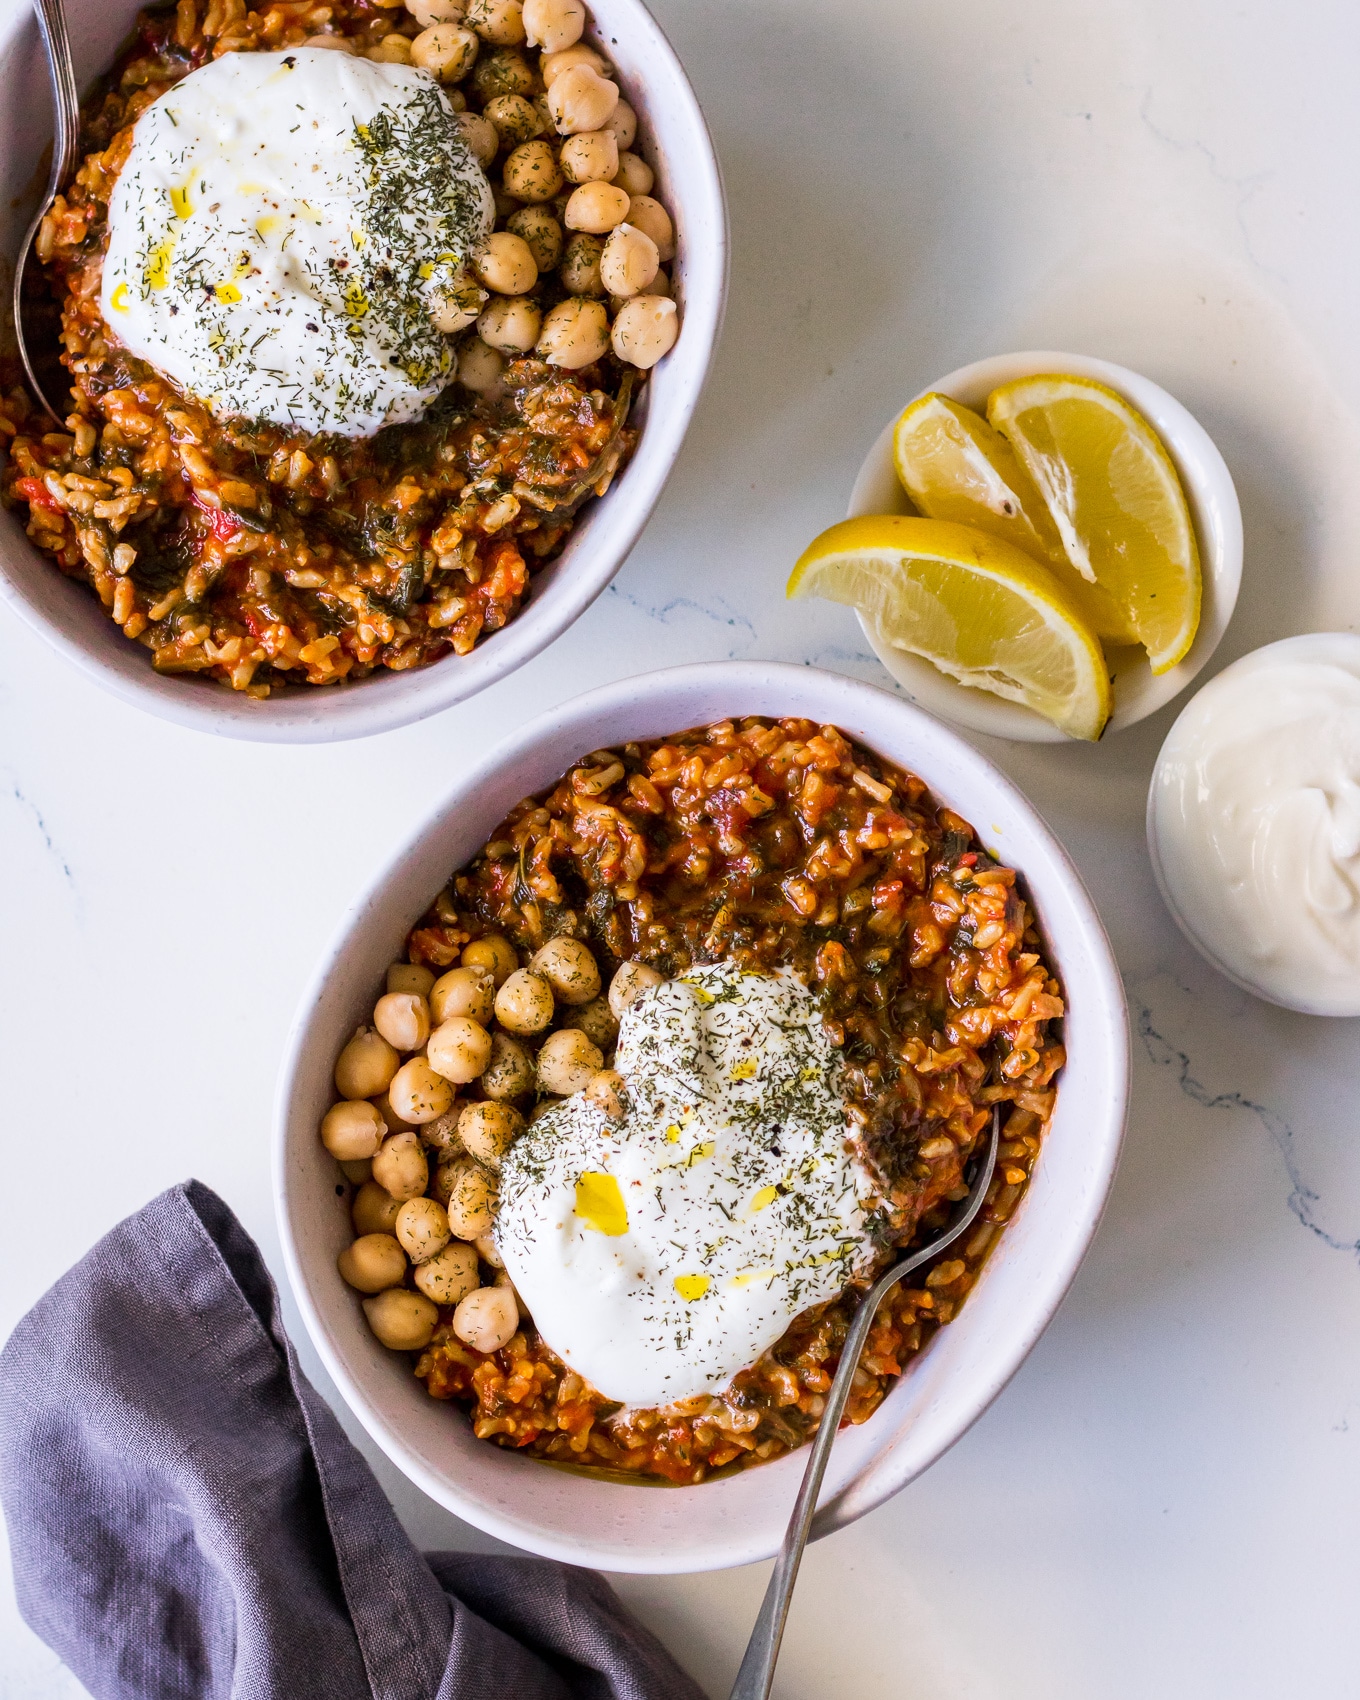 Bowls of spanakorizo (greek spinach and rice) with chickpeas and yoghurt and herbs